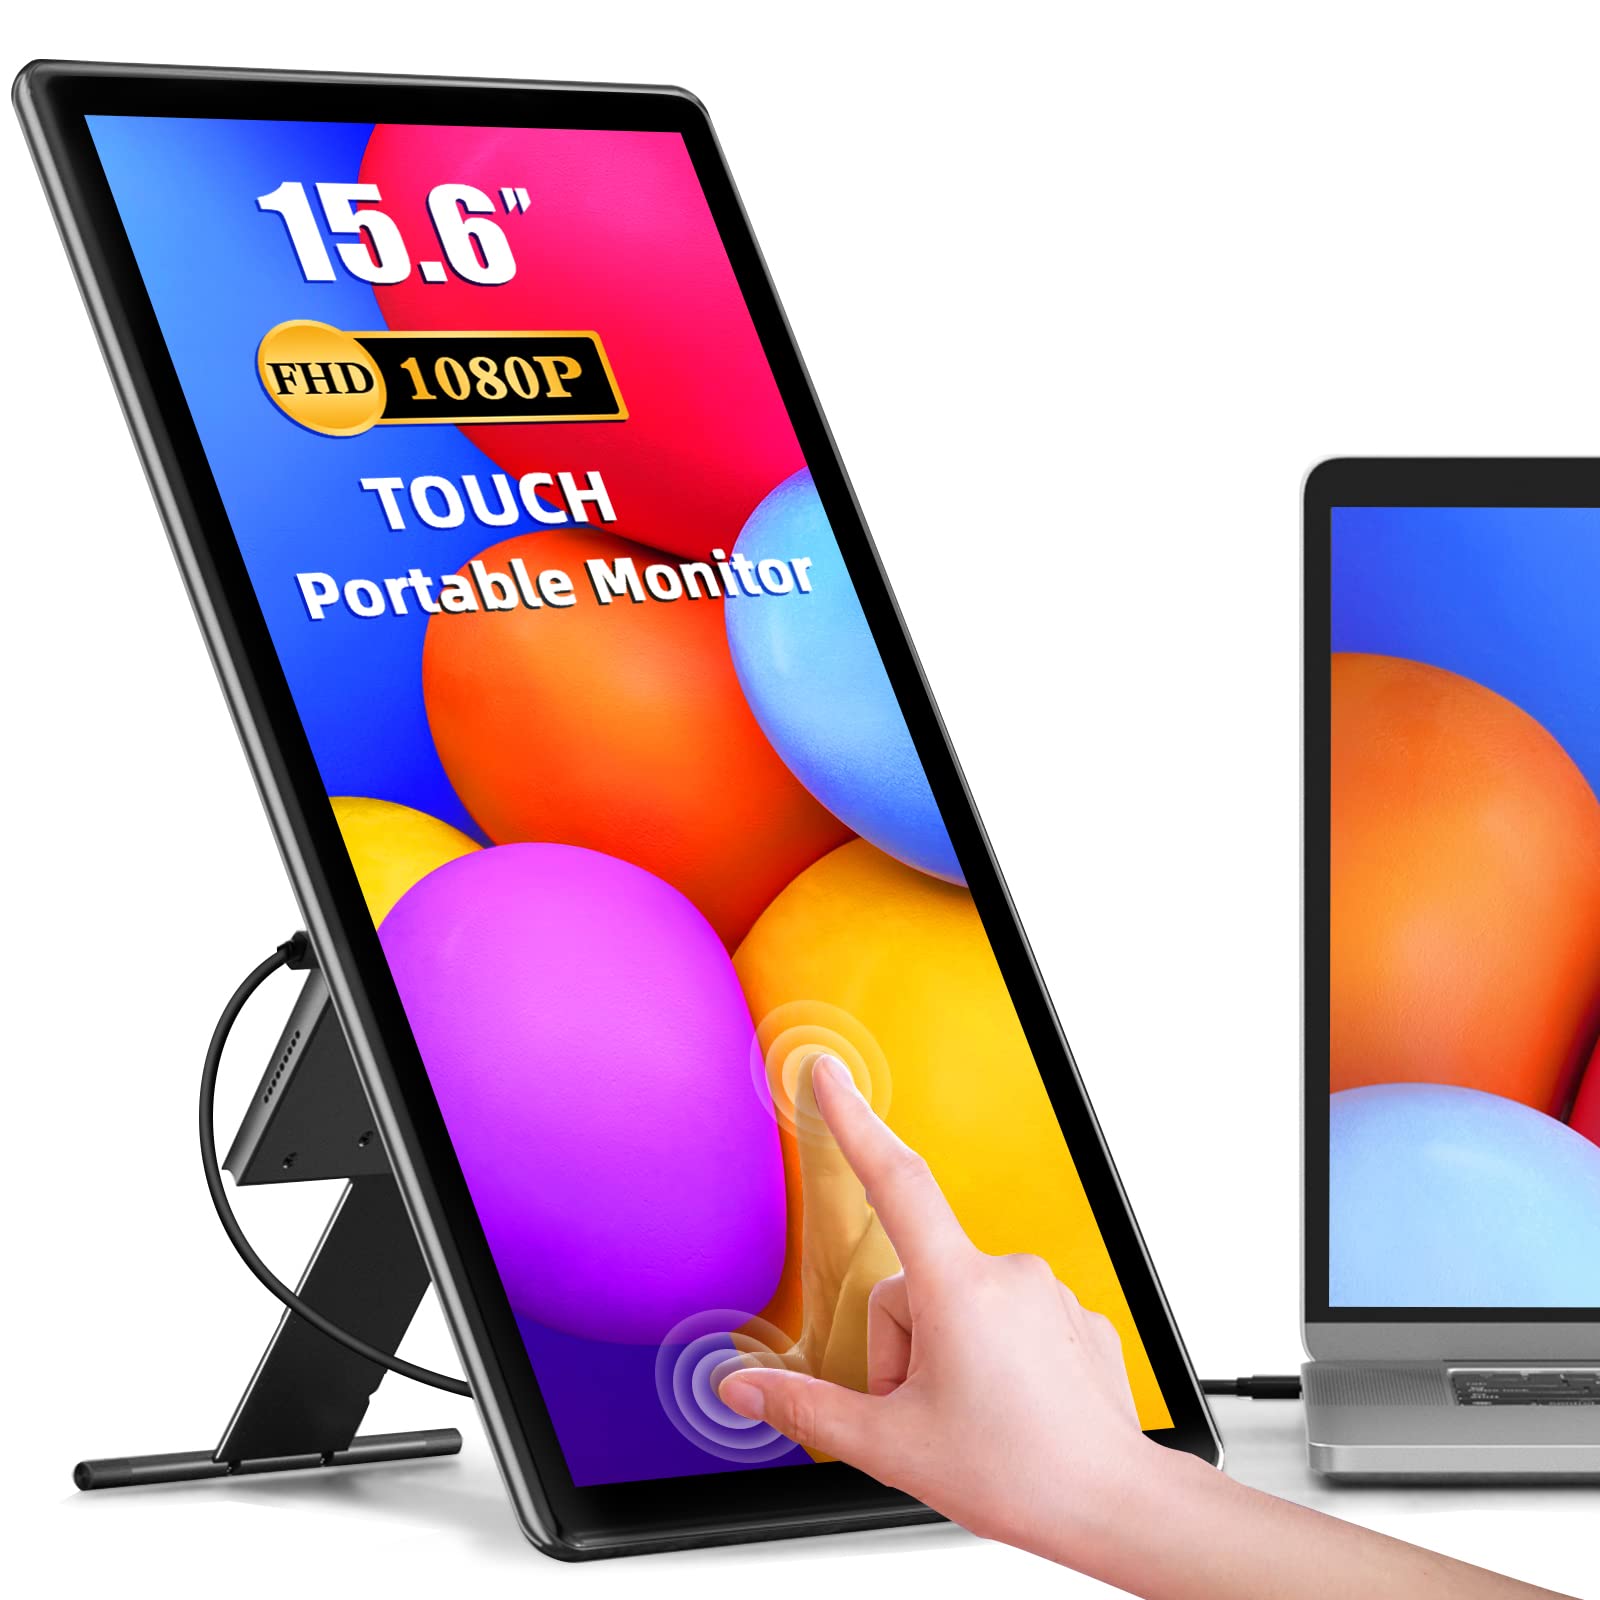 Portable Monitor Touchscreen Kickstand, 15.6" Freestanding Touch USB C Monitors, 2000:1 Contrast Ratio 1080P 100% sRGB IPS External Screen with...